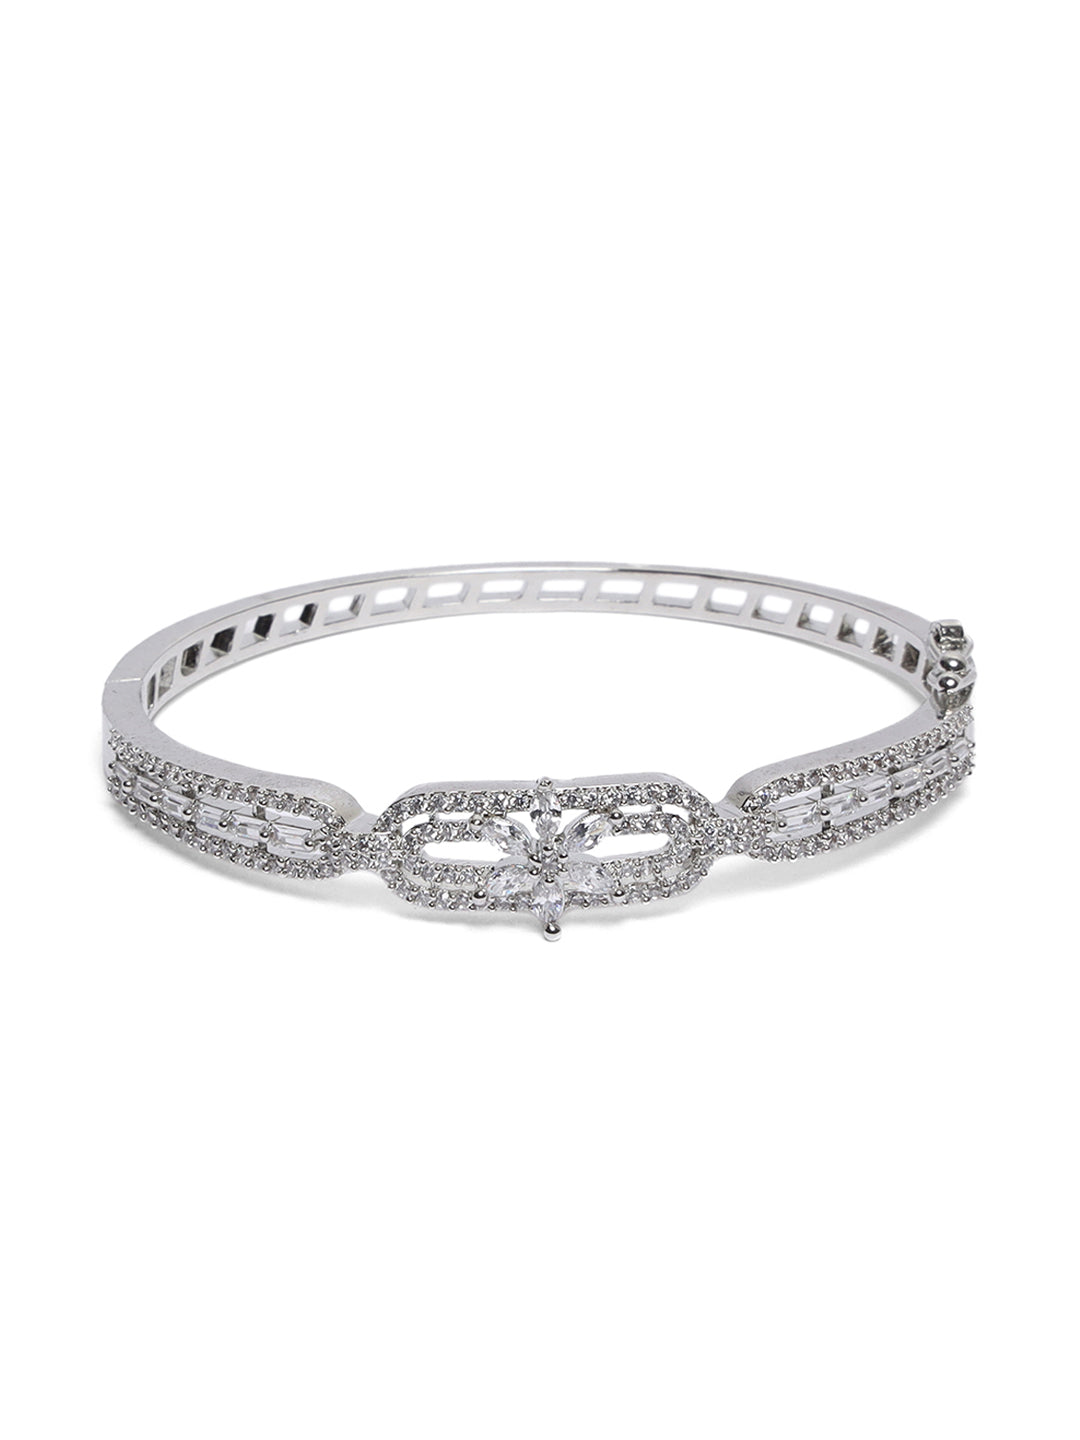 American Diamond Bracelet in Jhansi at best price by Lovely Jewellers - We  Make You Shine - Justdial